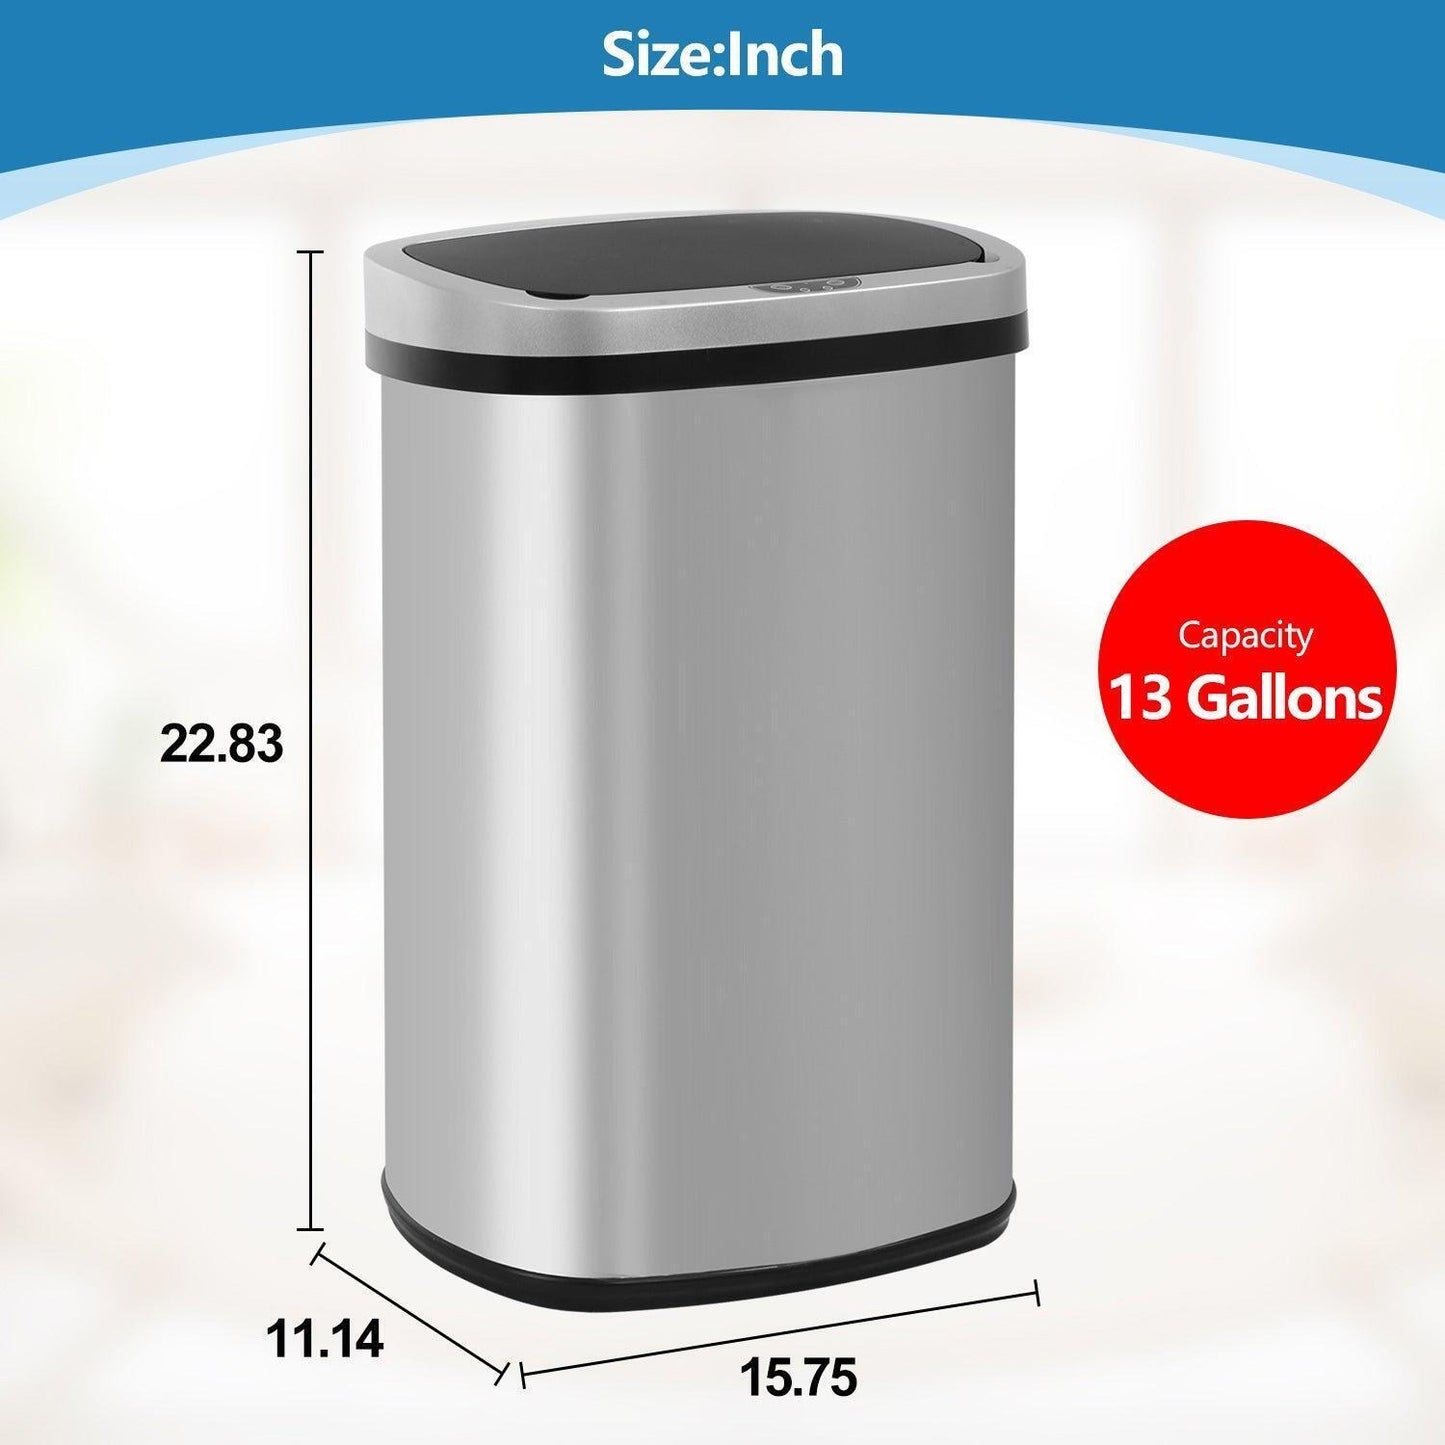 Auto Sensor Touchless Trash Can Kitchen Garbage Bin 50L/13G Stainless Steel